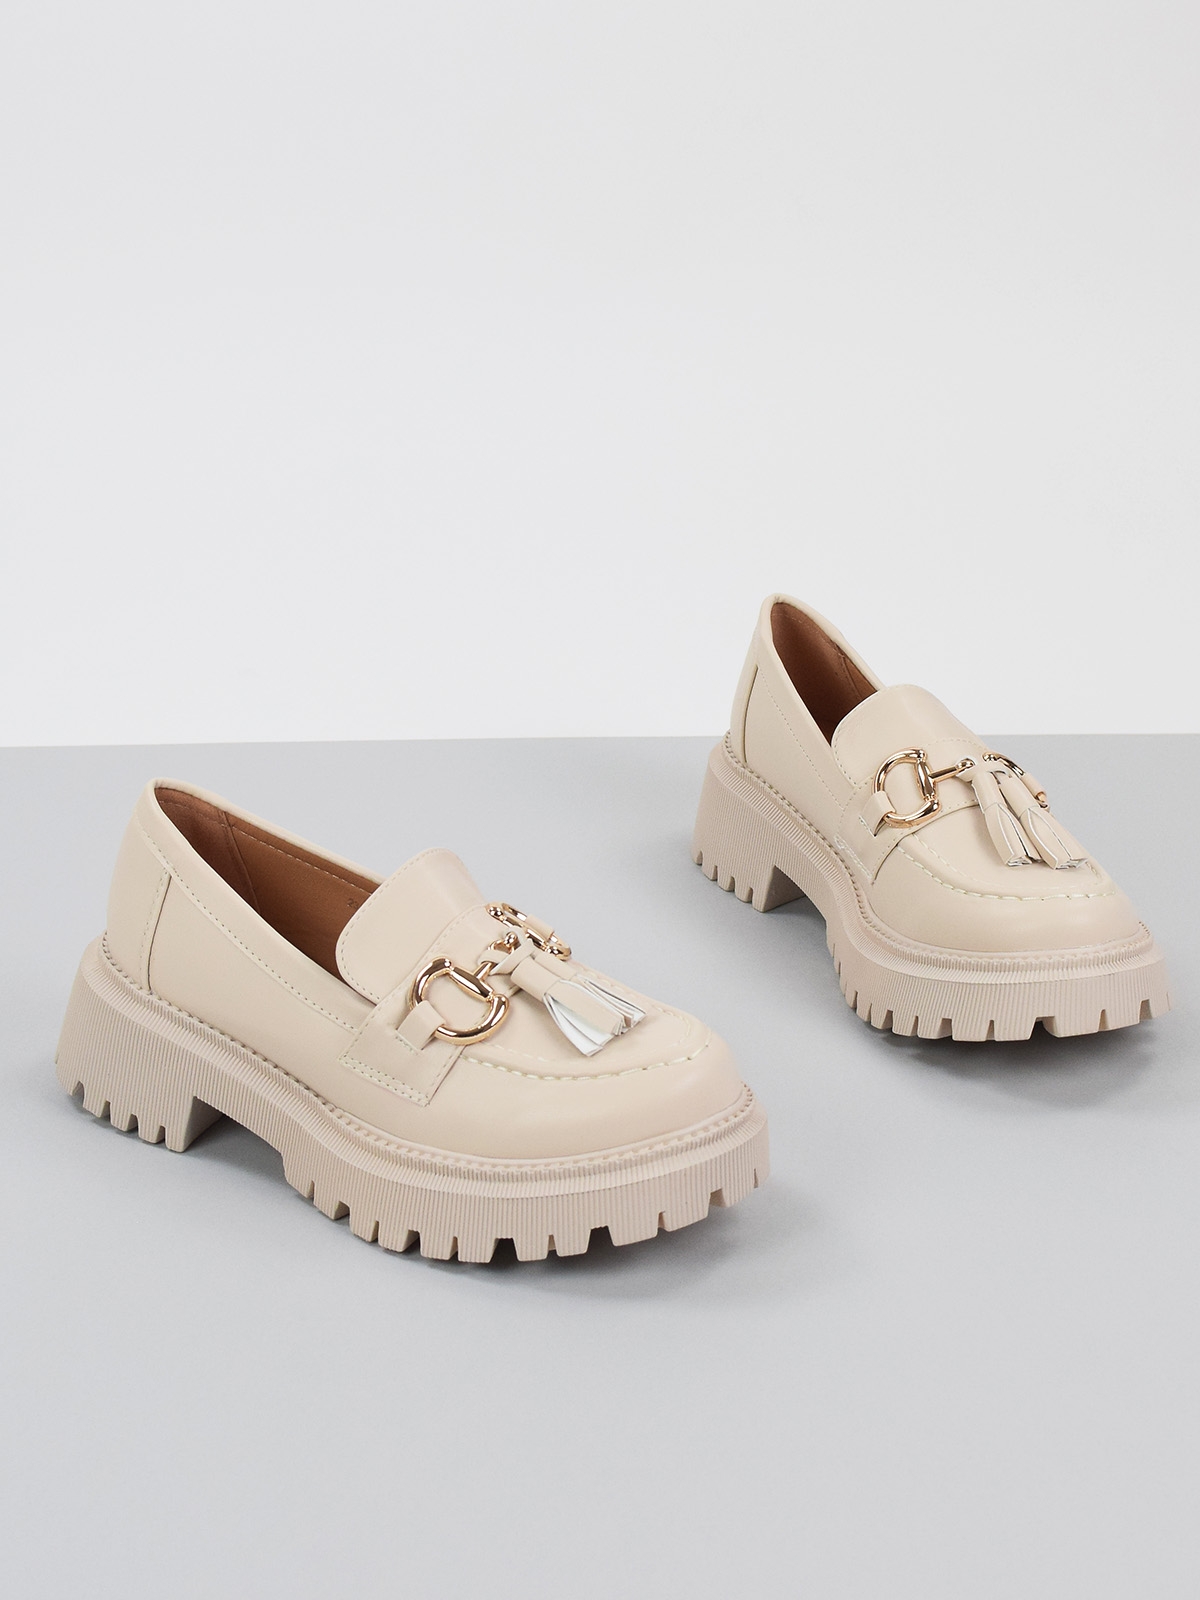 Chunky loafers with front gold trim and tassel in neutral color